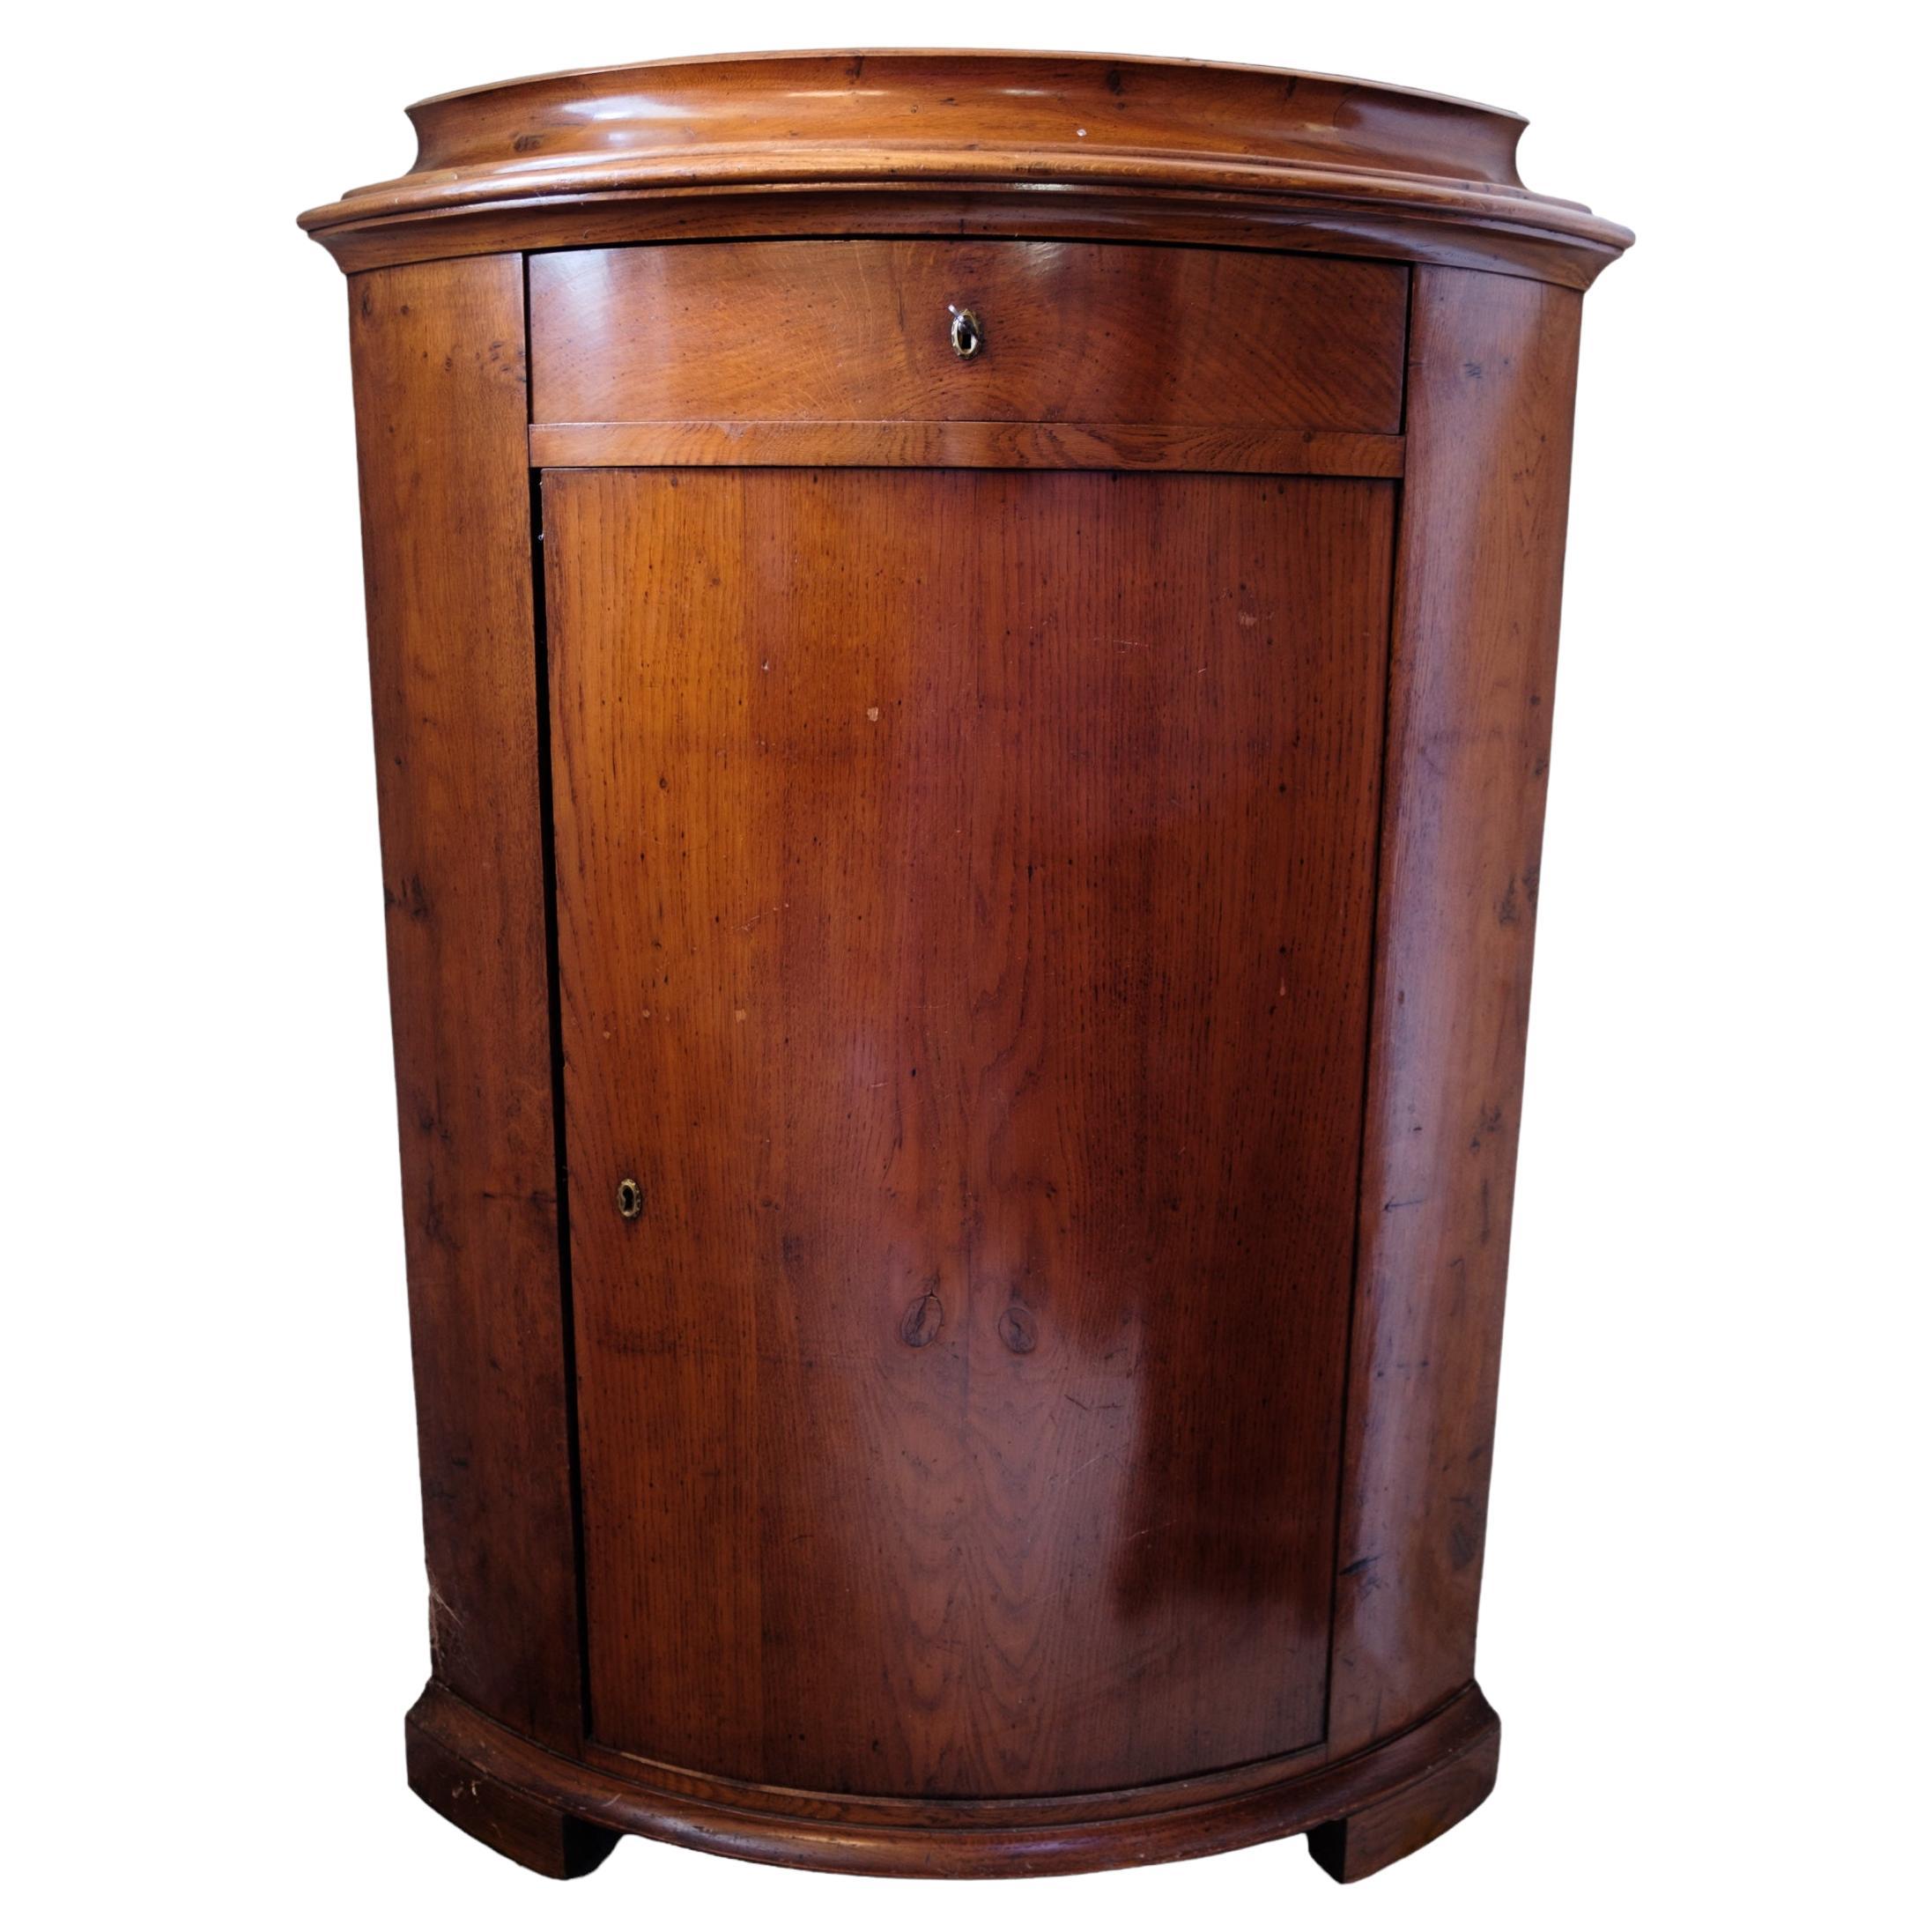 Small mahogany corner cabinet with door and drawer from around the 1880s